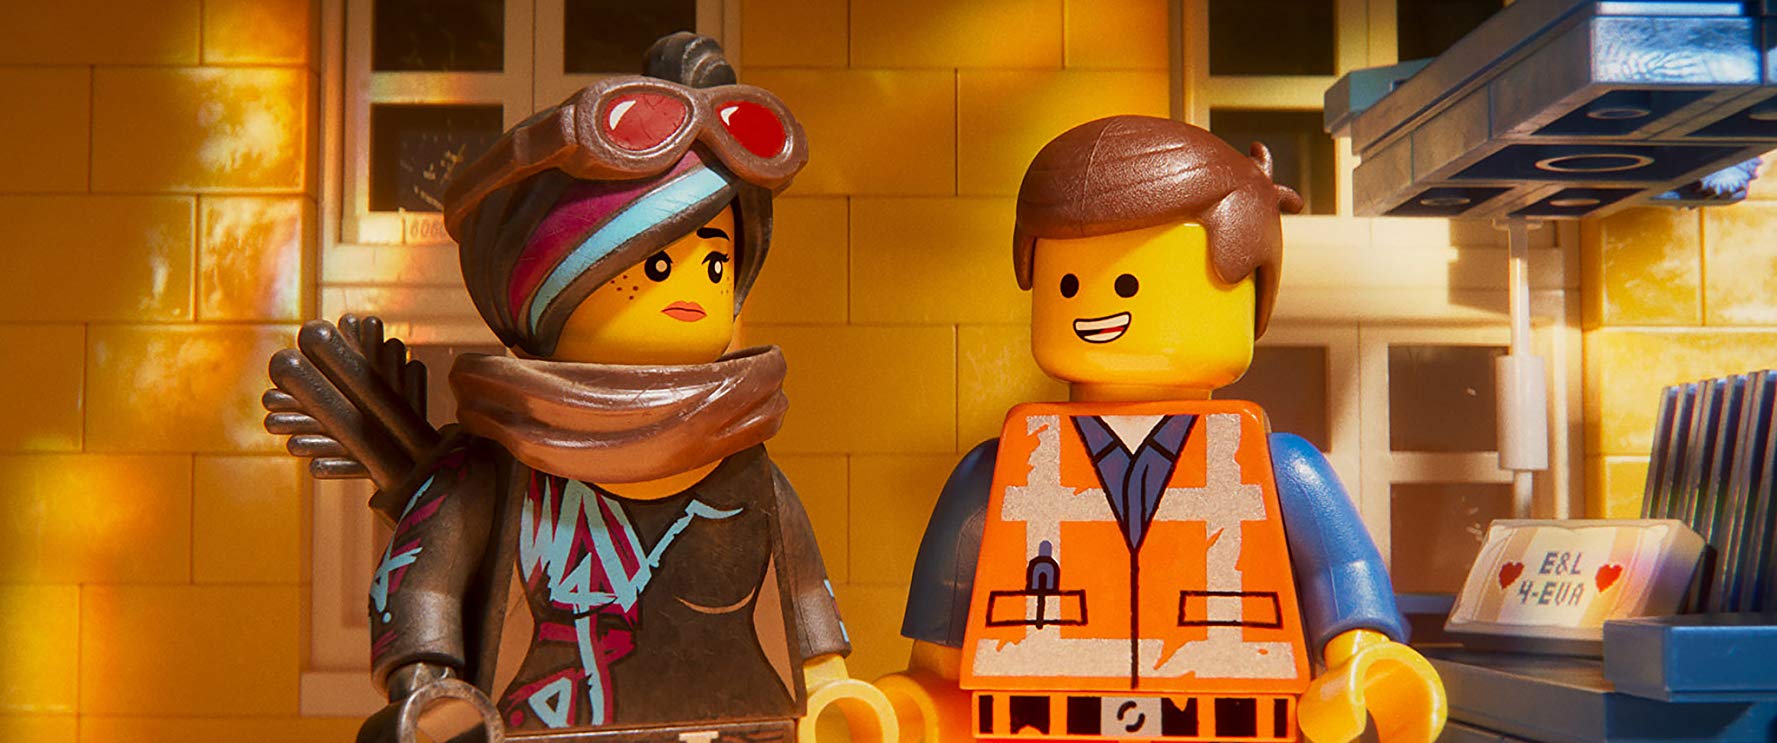 The Lego Movie 2: A New Adventure